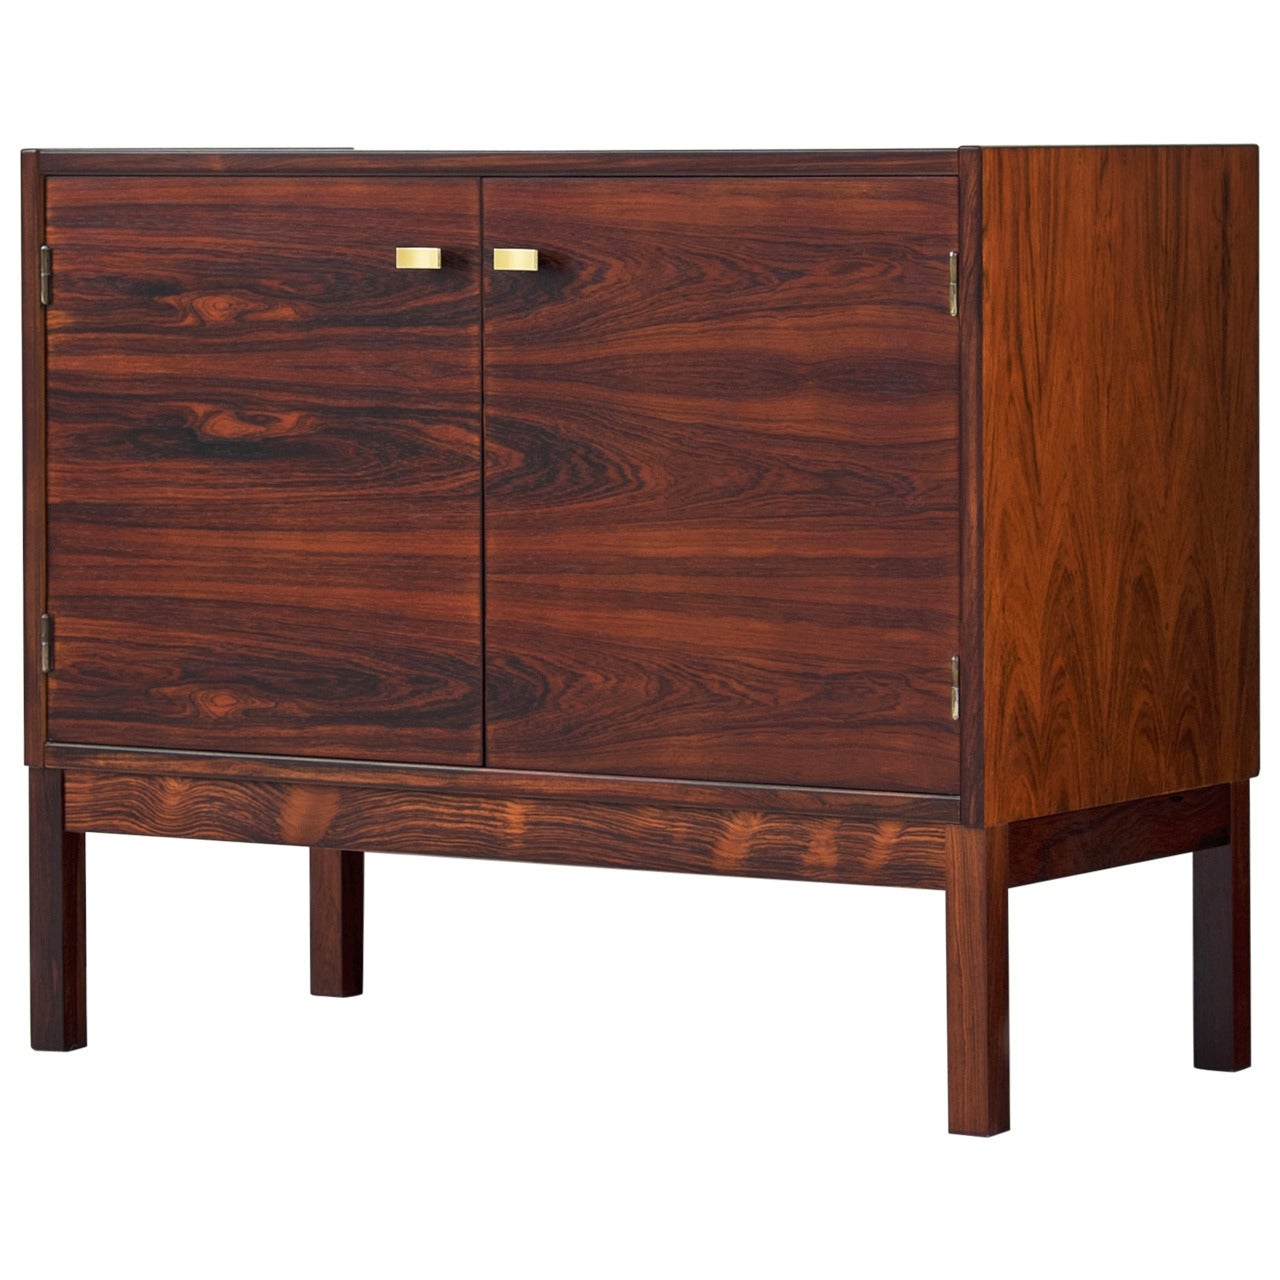 Small Sideboard Made of Rosewood with Brass Details